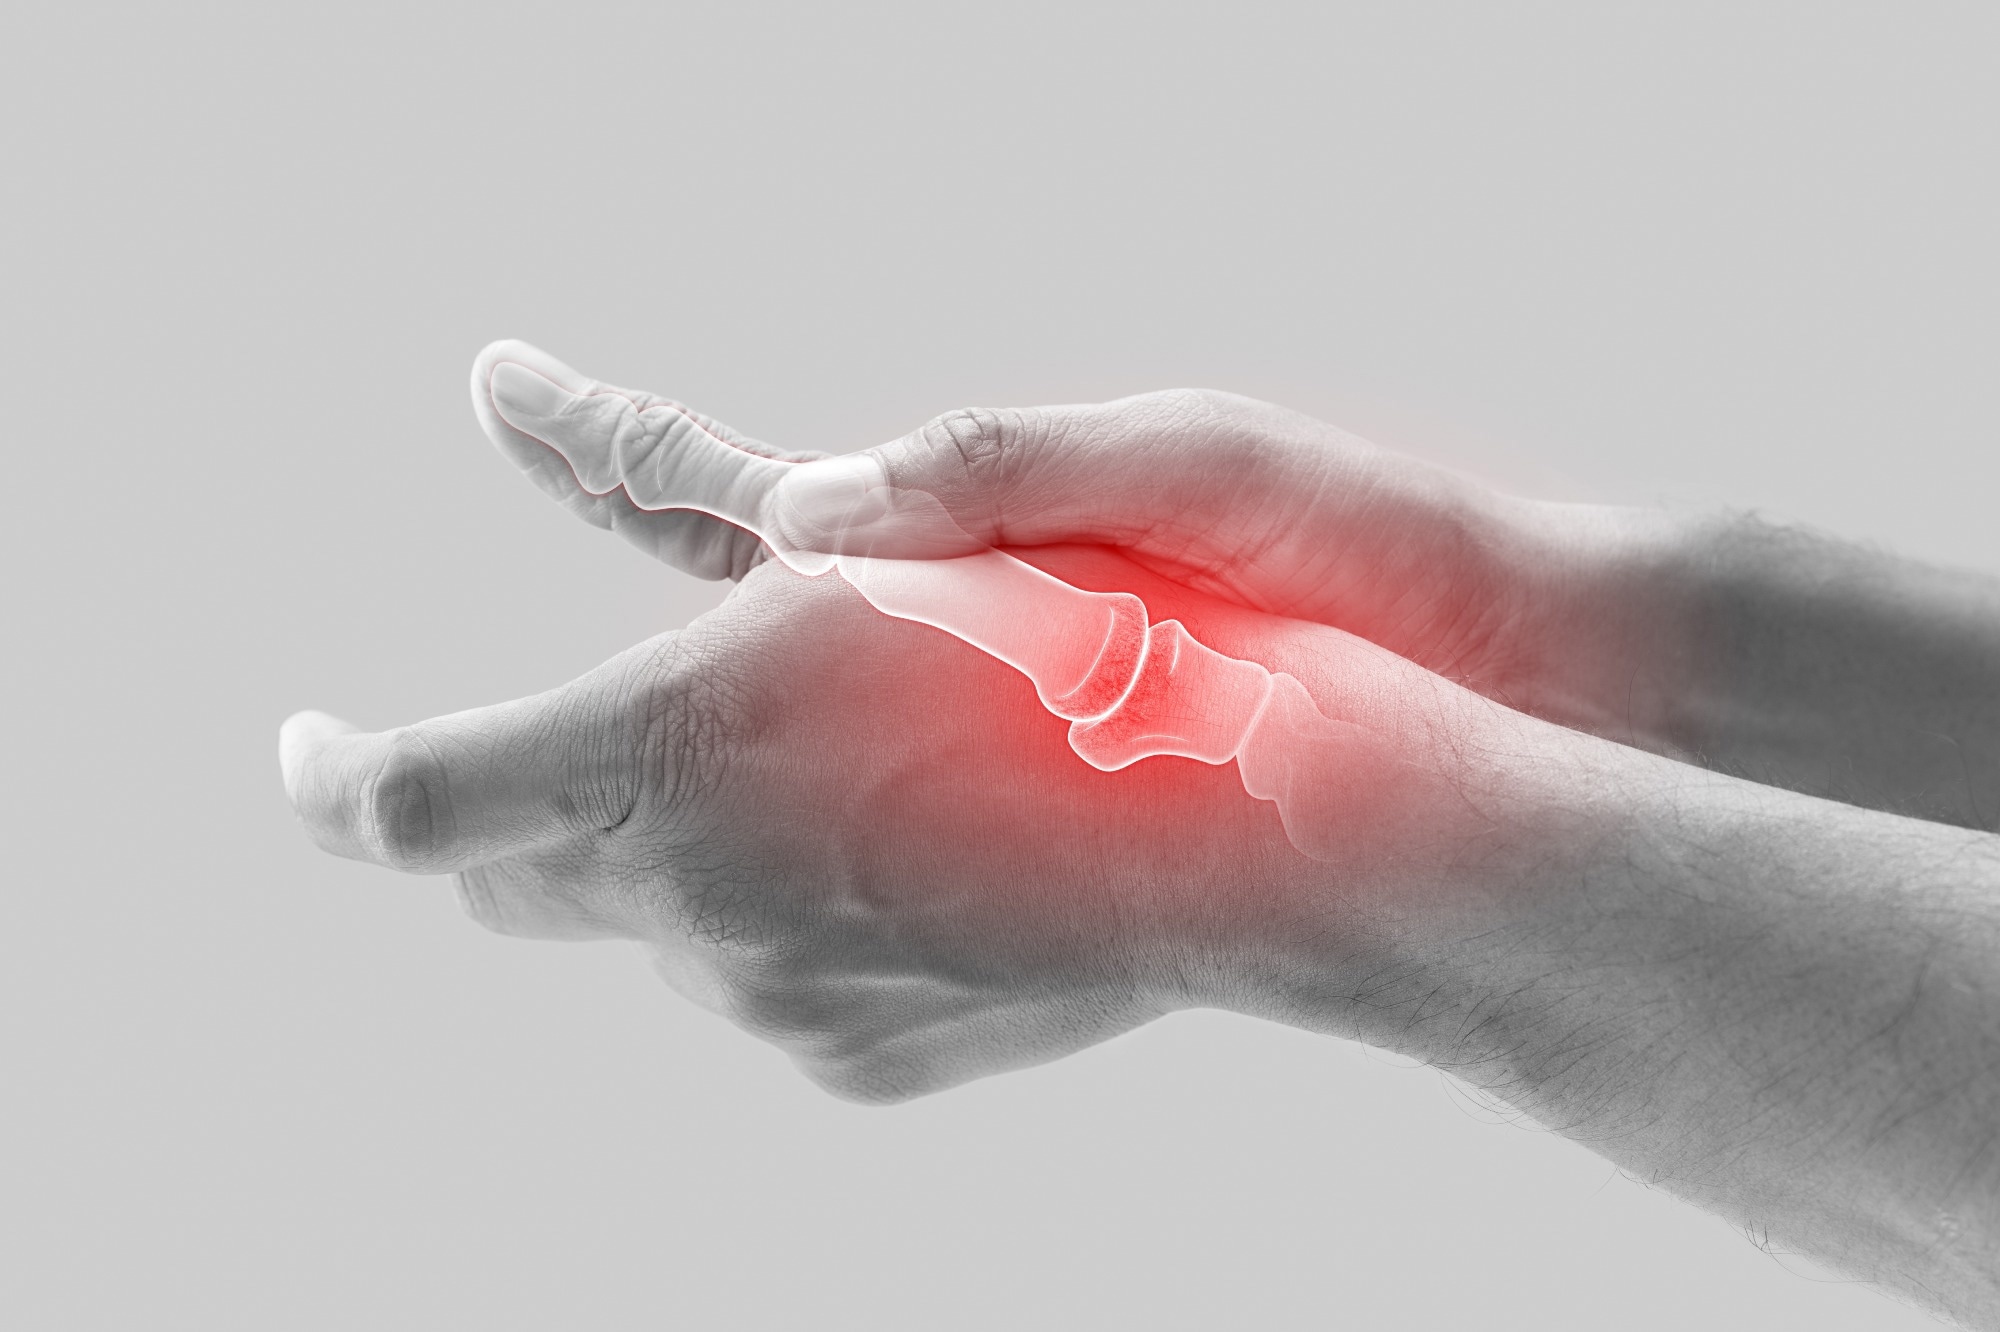 Study: No genetic causal association between circulating alpha-tocopherol levels and osteoarthritis, a two-sample Mendelian randomization analysis. Image Credit: Emily frost / Shutterstock.com